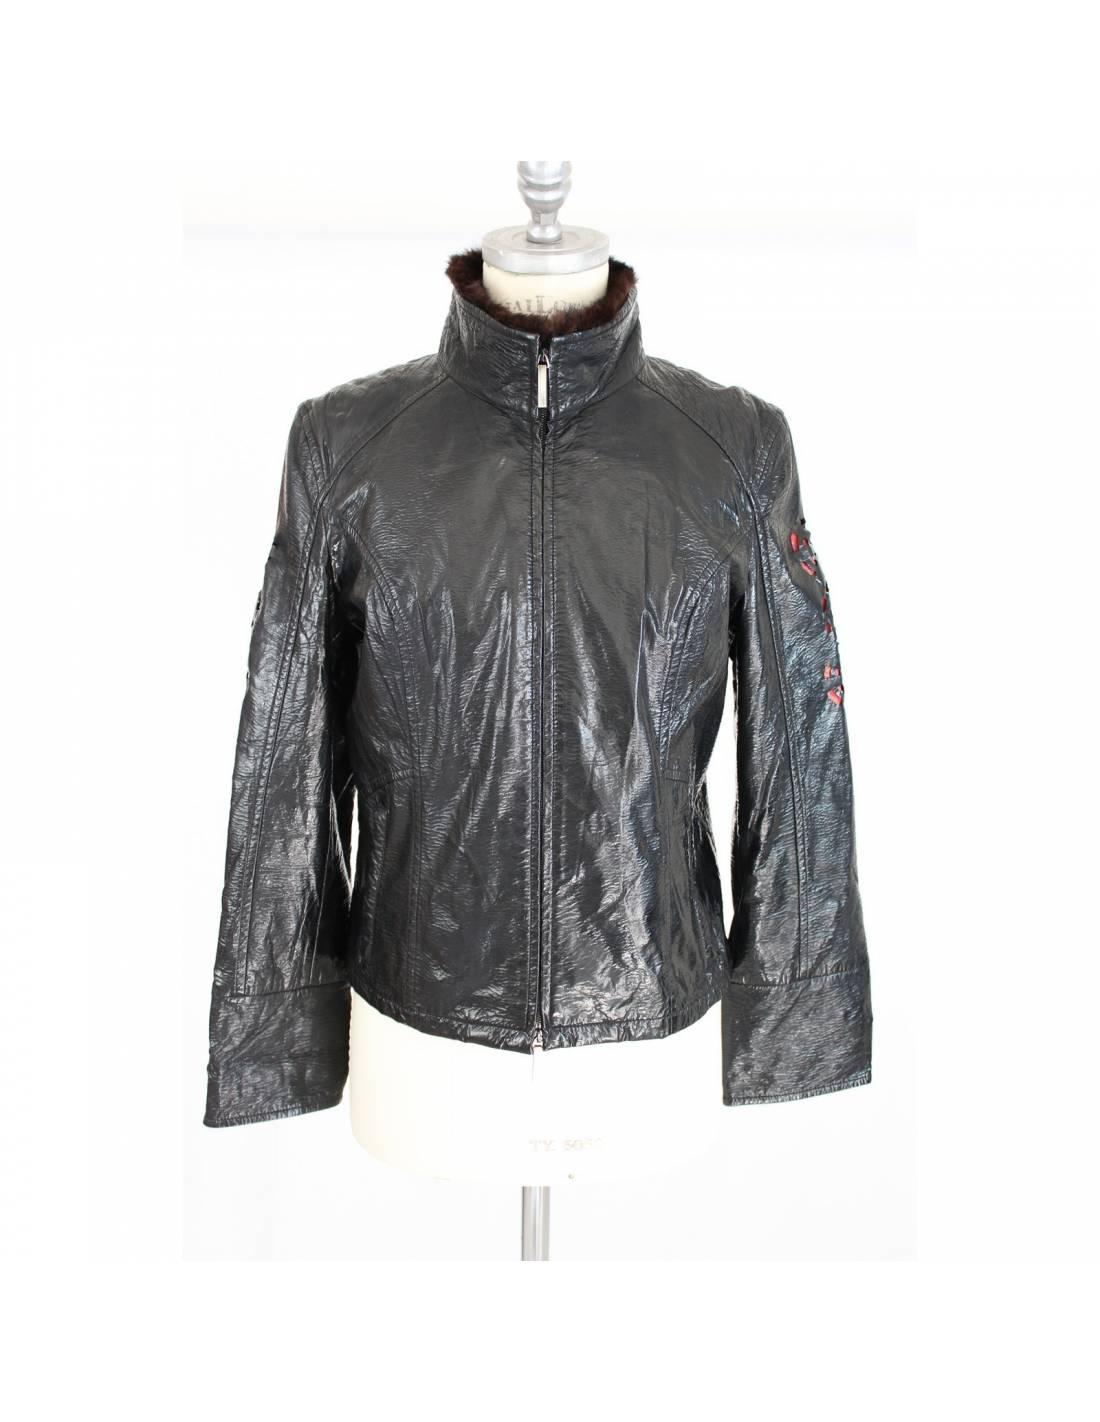 Roccobarocco vintage jacket 1980s, black color, faux leather.

Slim fit jacket with iridescent fabric, floral inlays on the shoulders that reveal the red fabric underneath, the collar is in faux fur, zip closure. Excellent vintage condition.

Size: